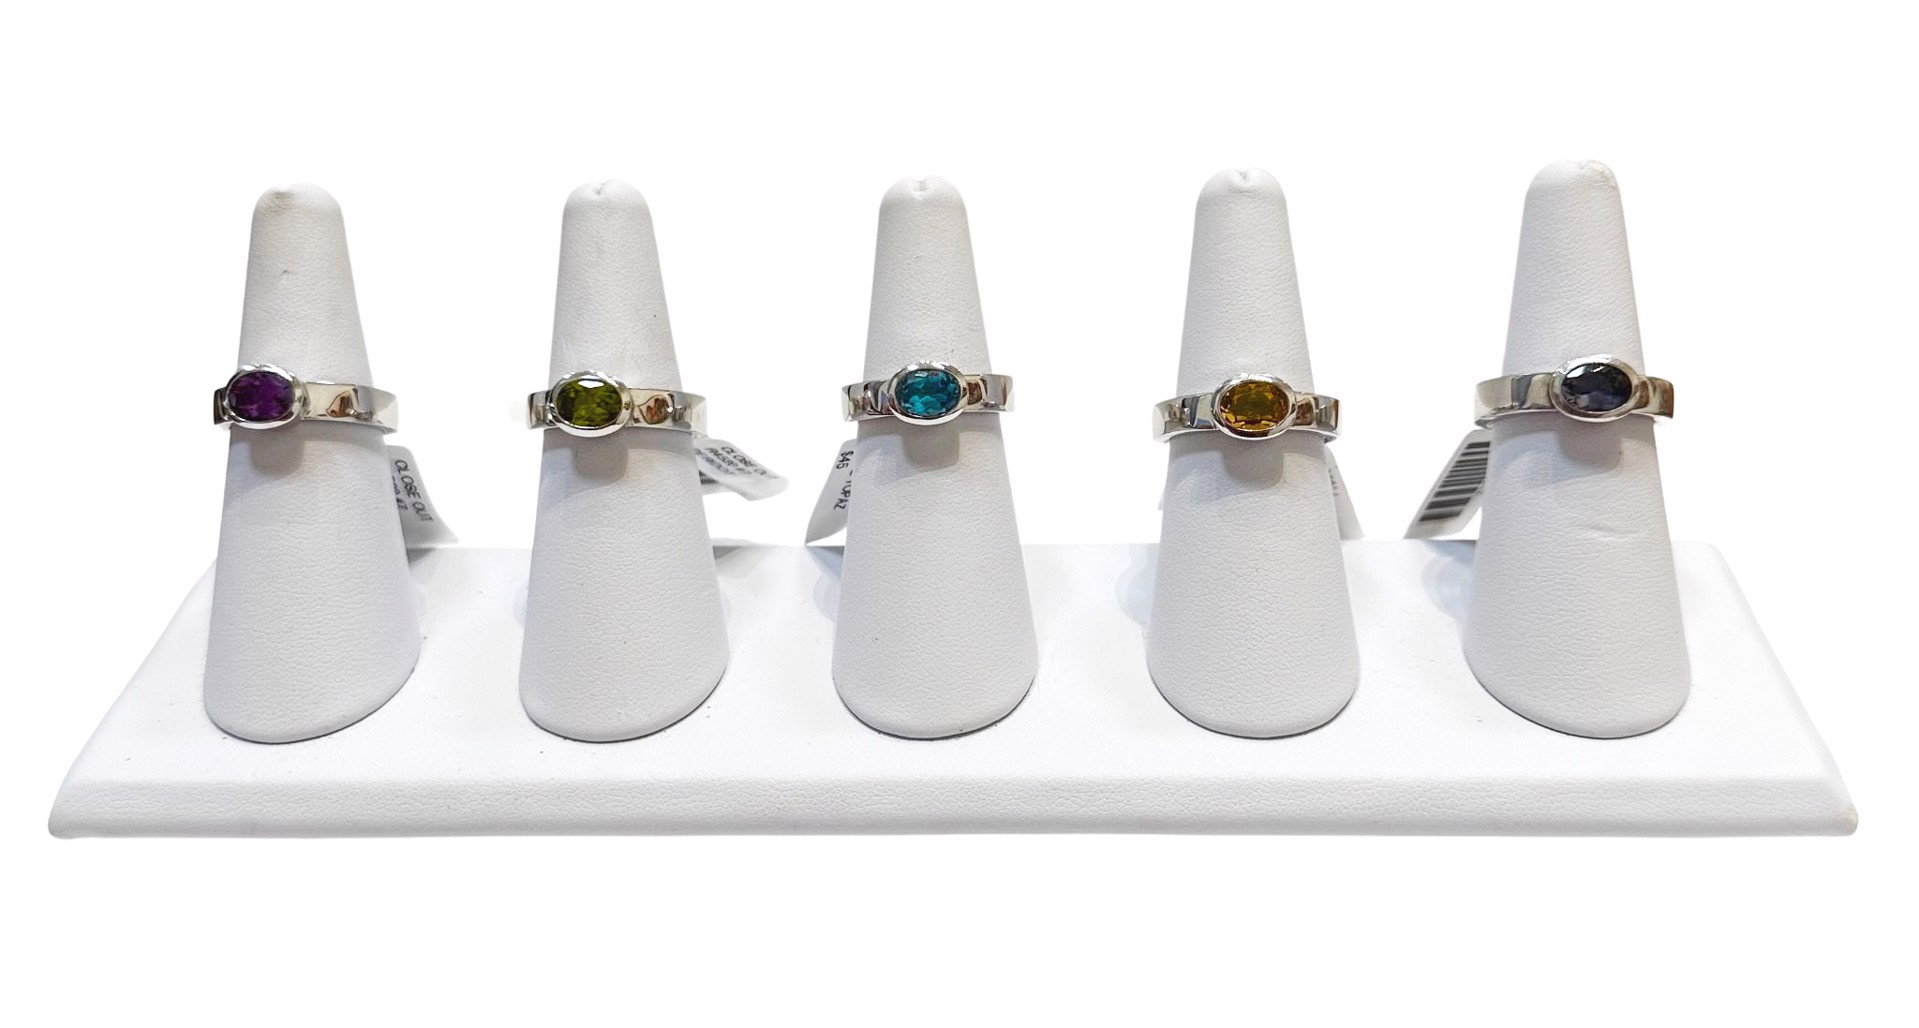 Rings - Stackable Faceted Stones by Joryel Vera